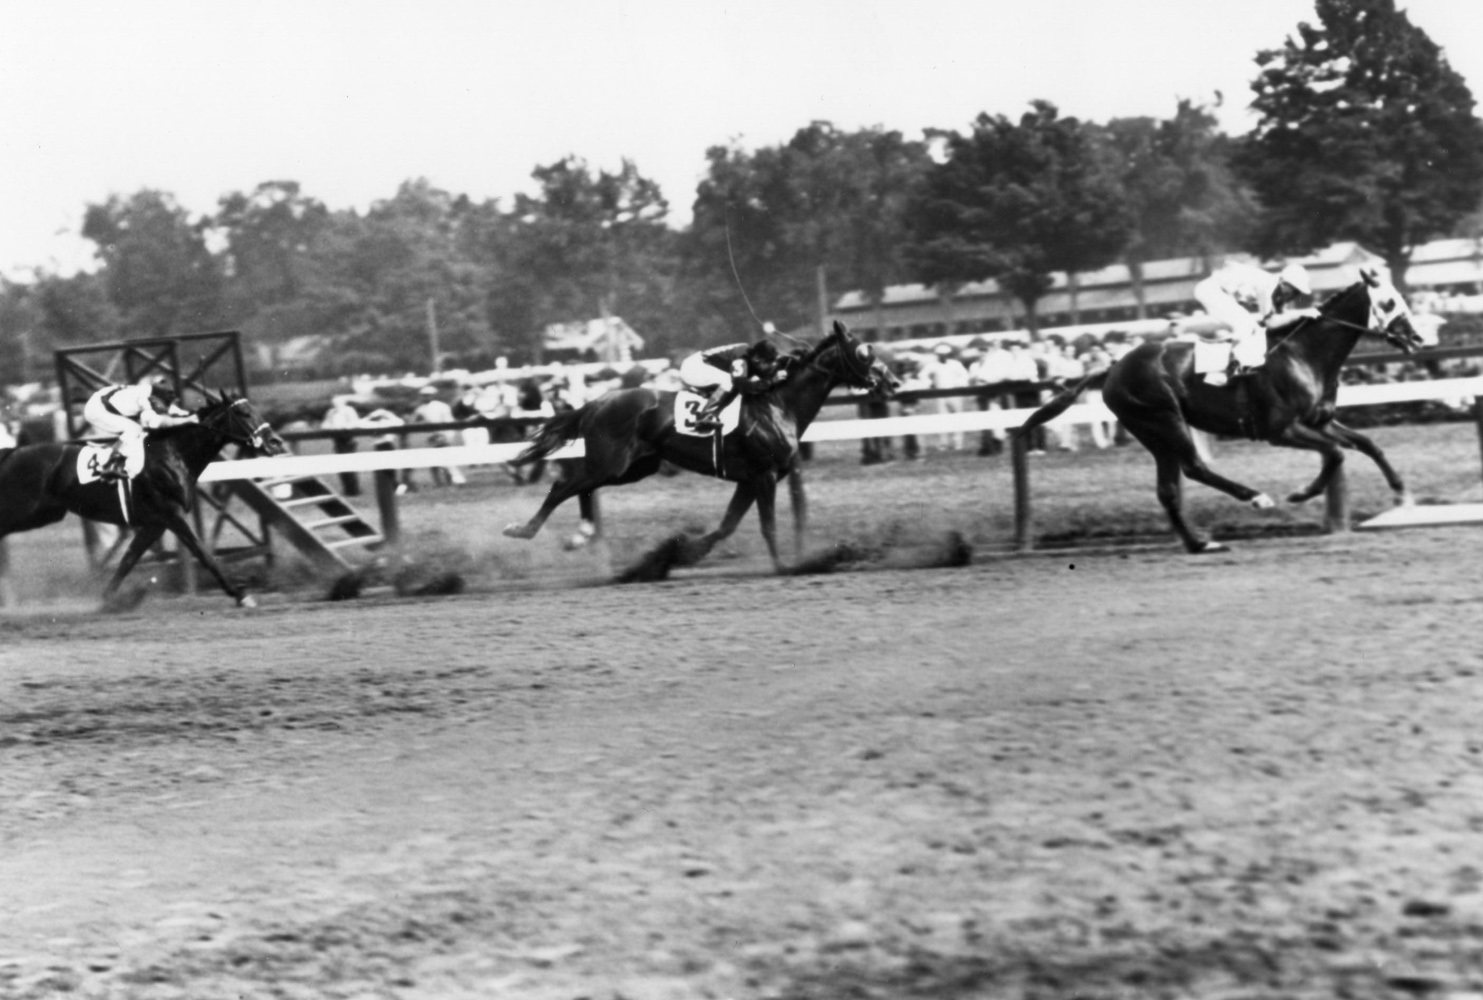 Discovery (John Bejshak up) winning the 1935 Merchants and Citizens Handicap at Saratoga (Keeneland Library Cook Collection/Museum Collection)